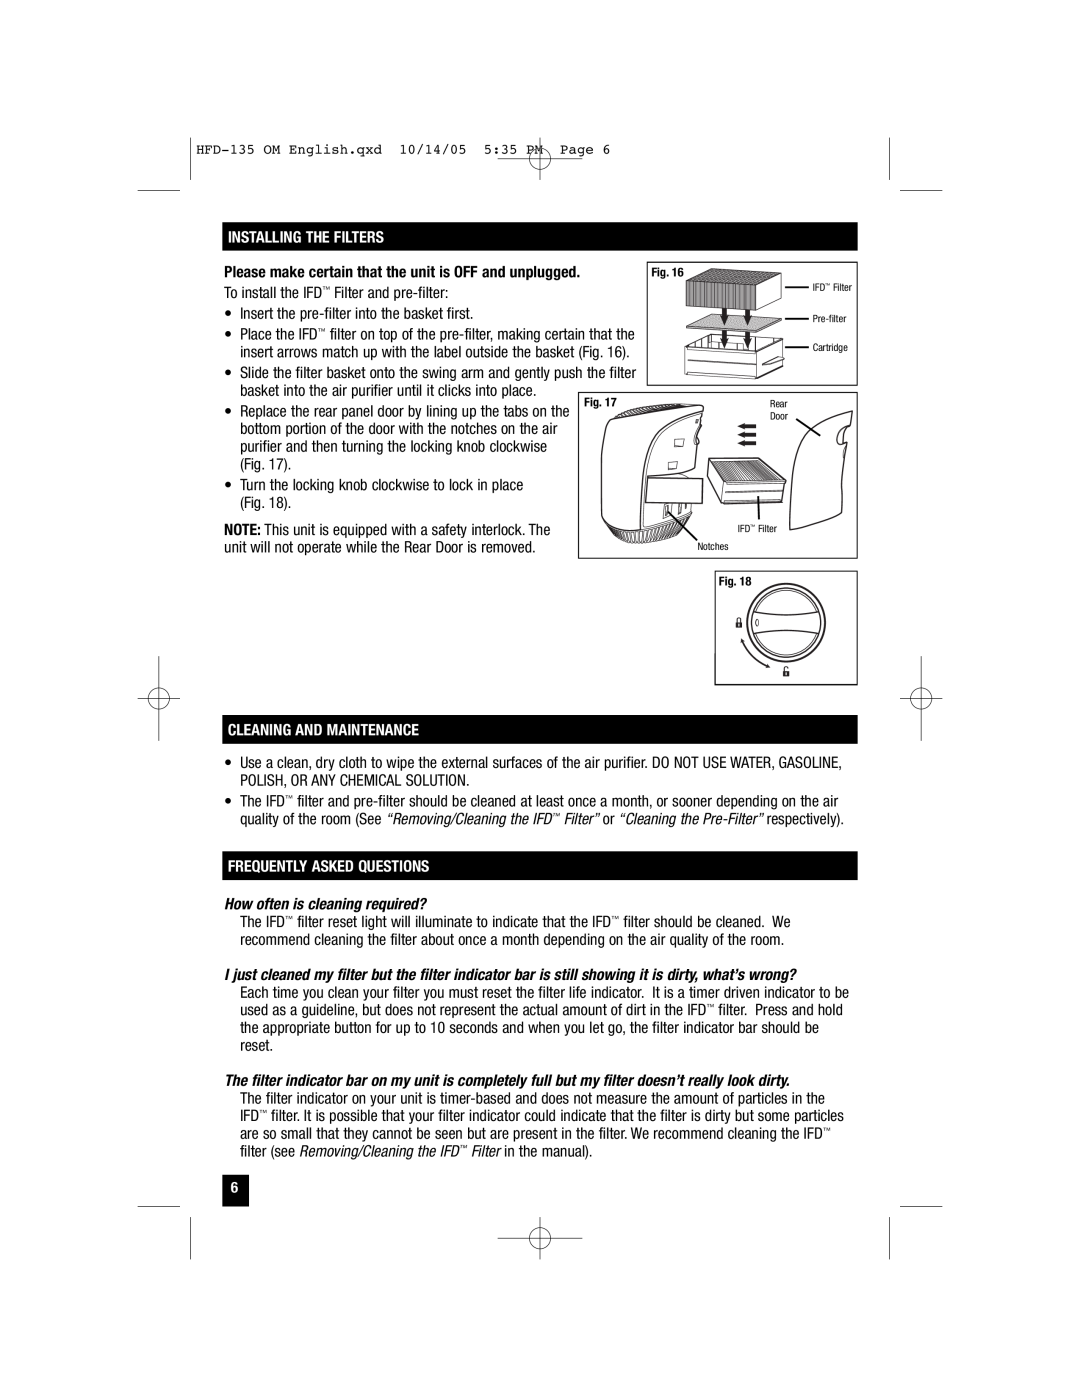 Vicks HFD-135 important safety instructions Installing The Filters, Cleaning And Maintenance, Frequently Asked Questions 